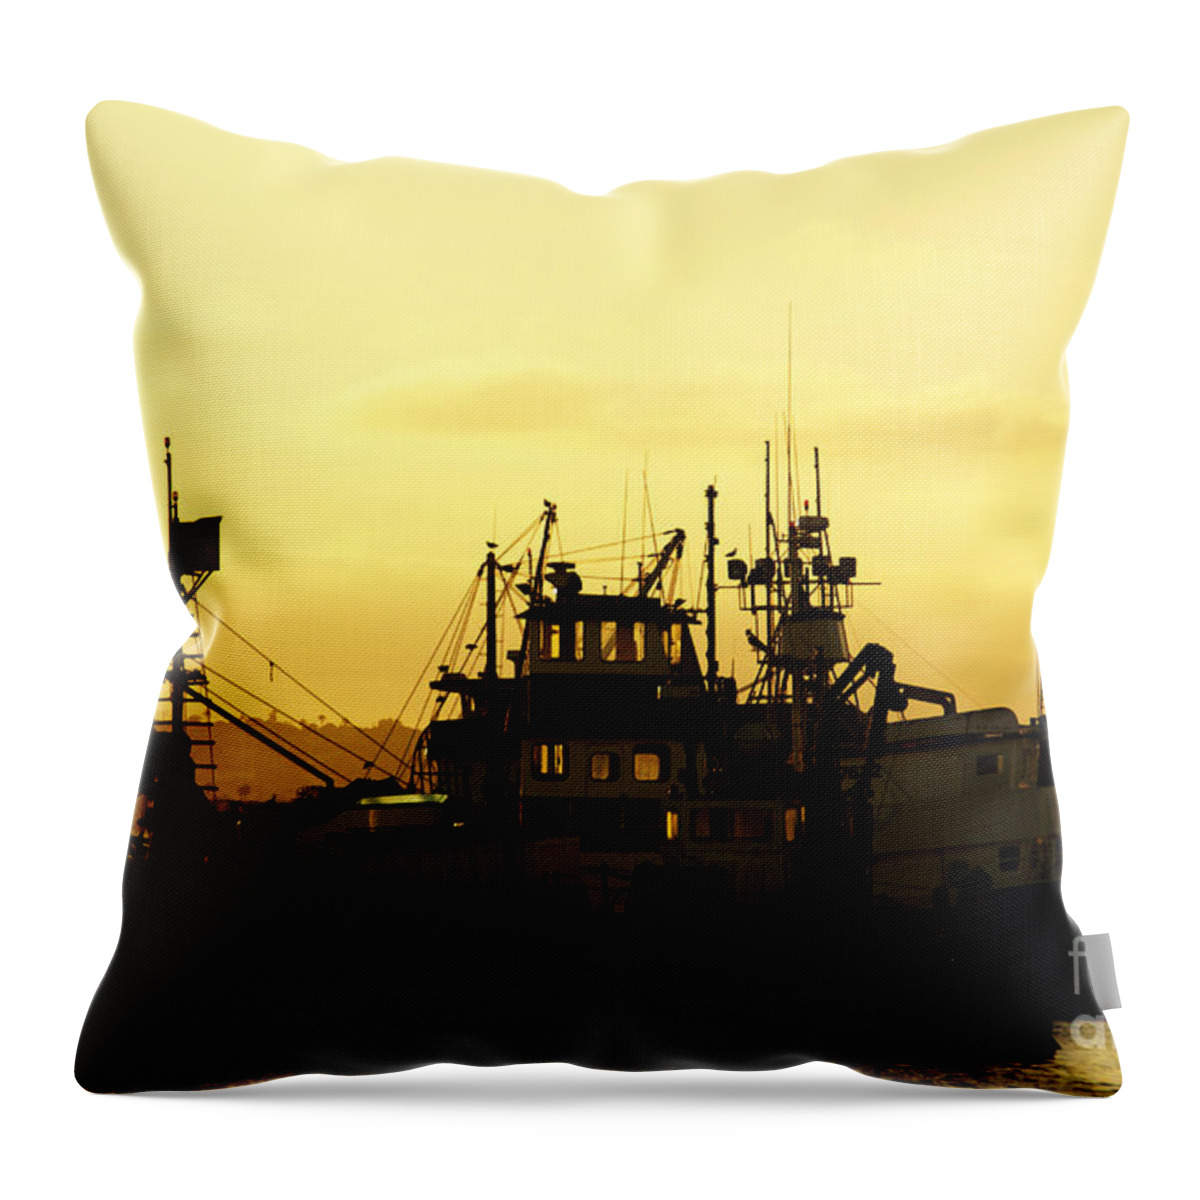 San Diego Throw Pillow featuring the photograph At Days End by Linda Shafer